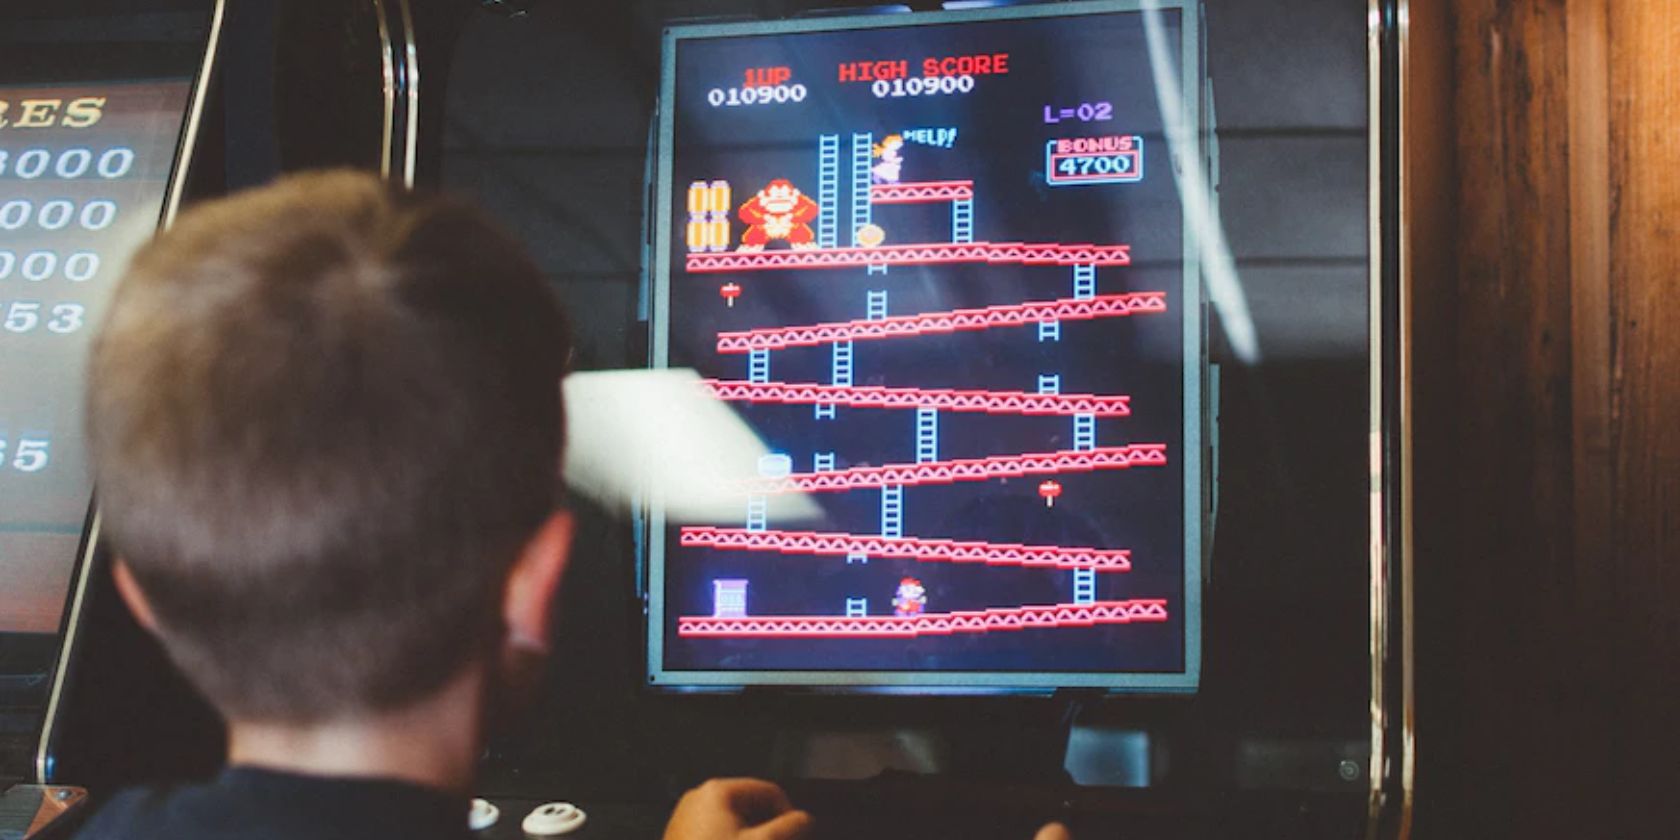 A child plays Donkey Kong, a classic arcade game with different levels